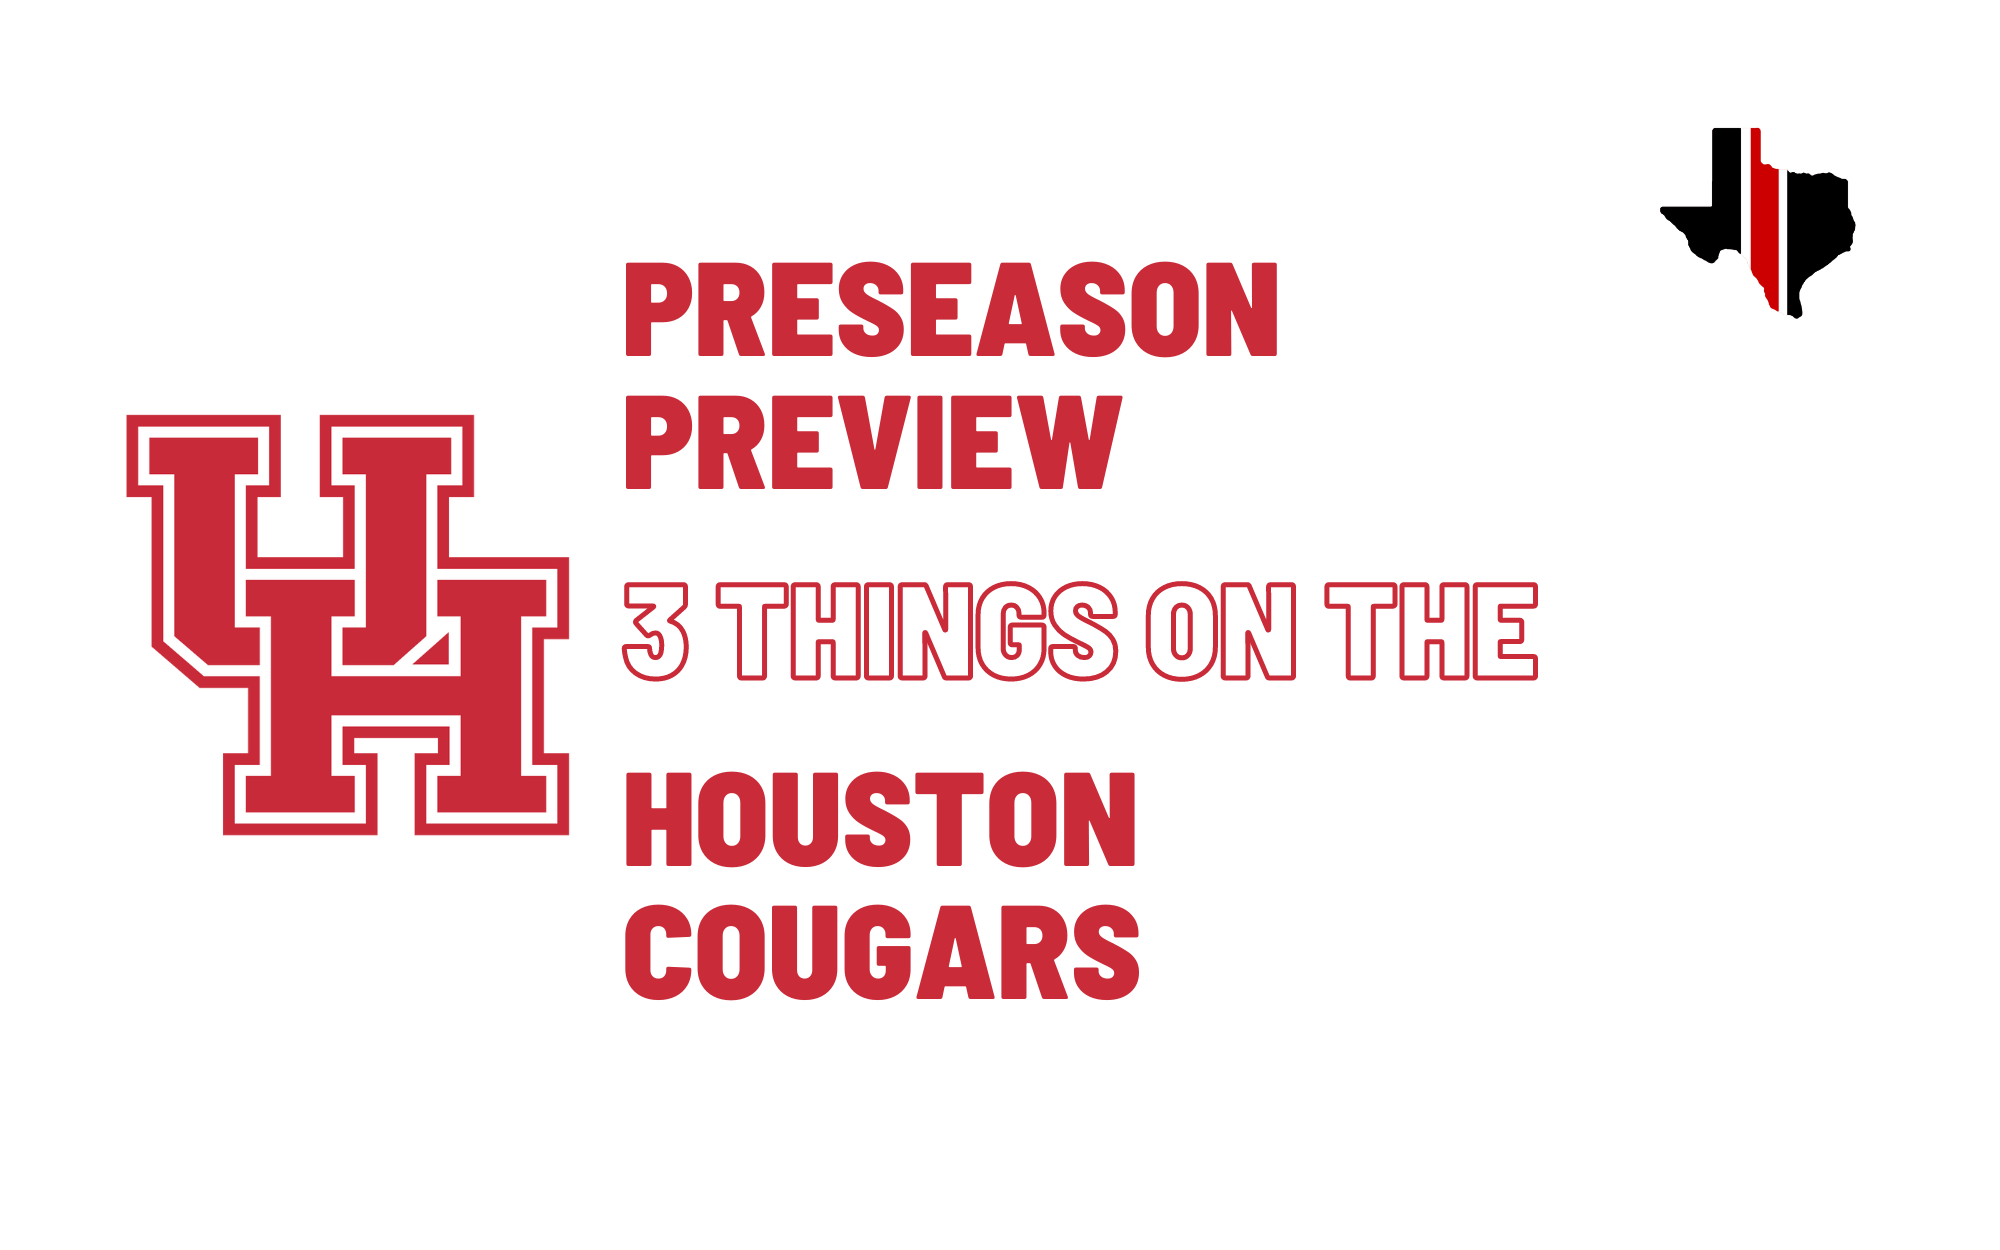 Preseason Preview | 3 Things on the Houston Cougars